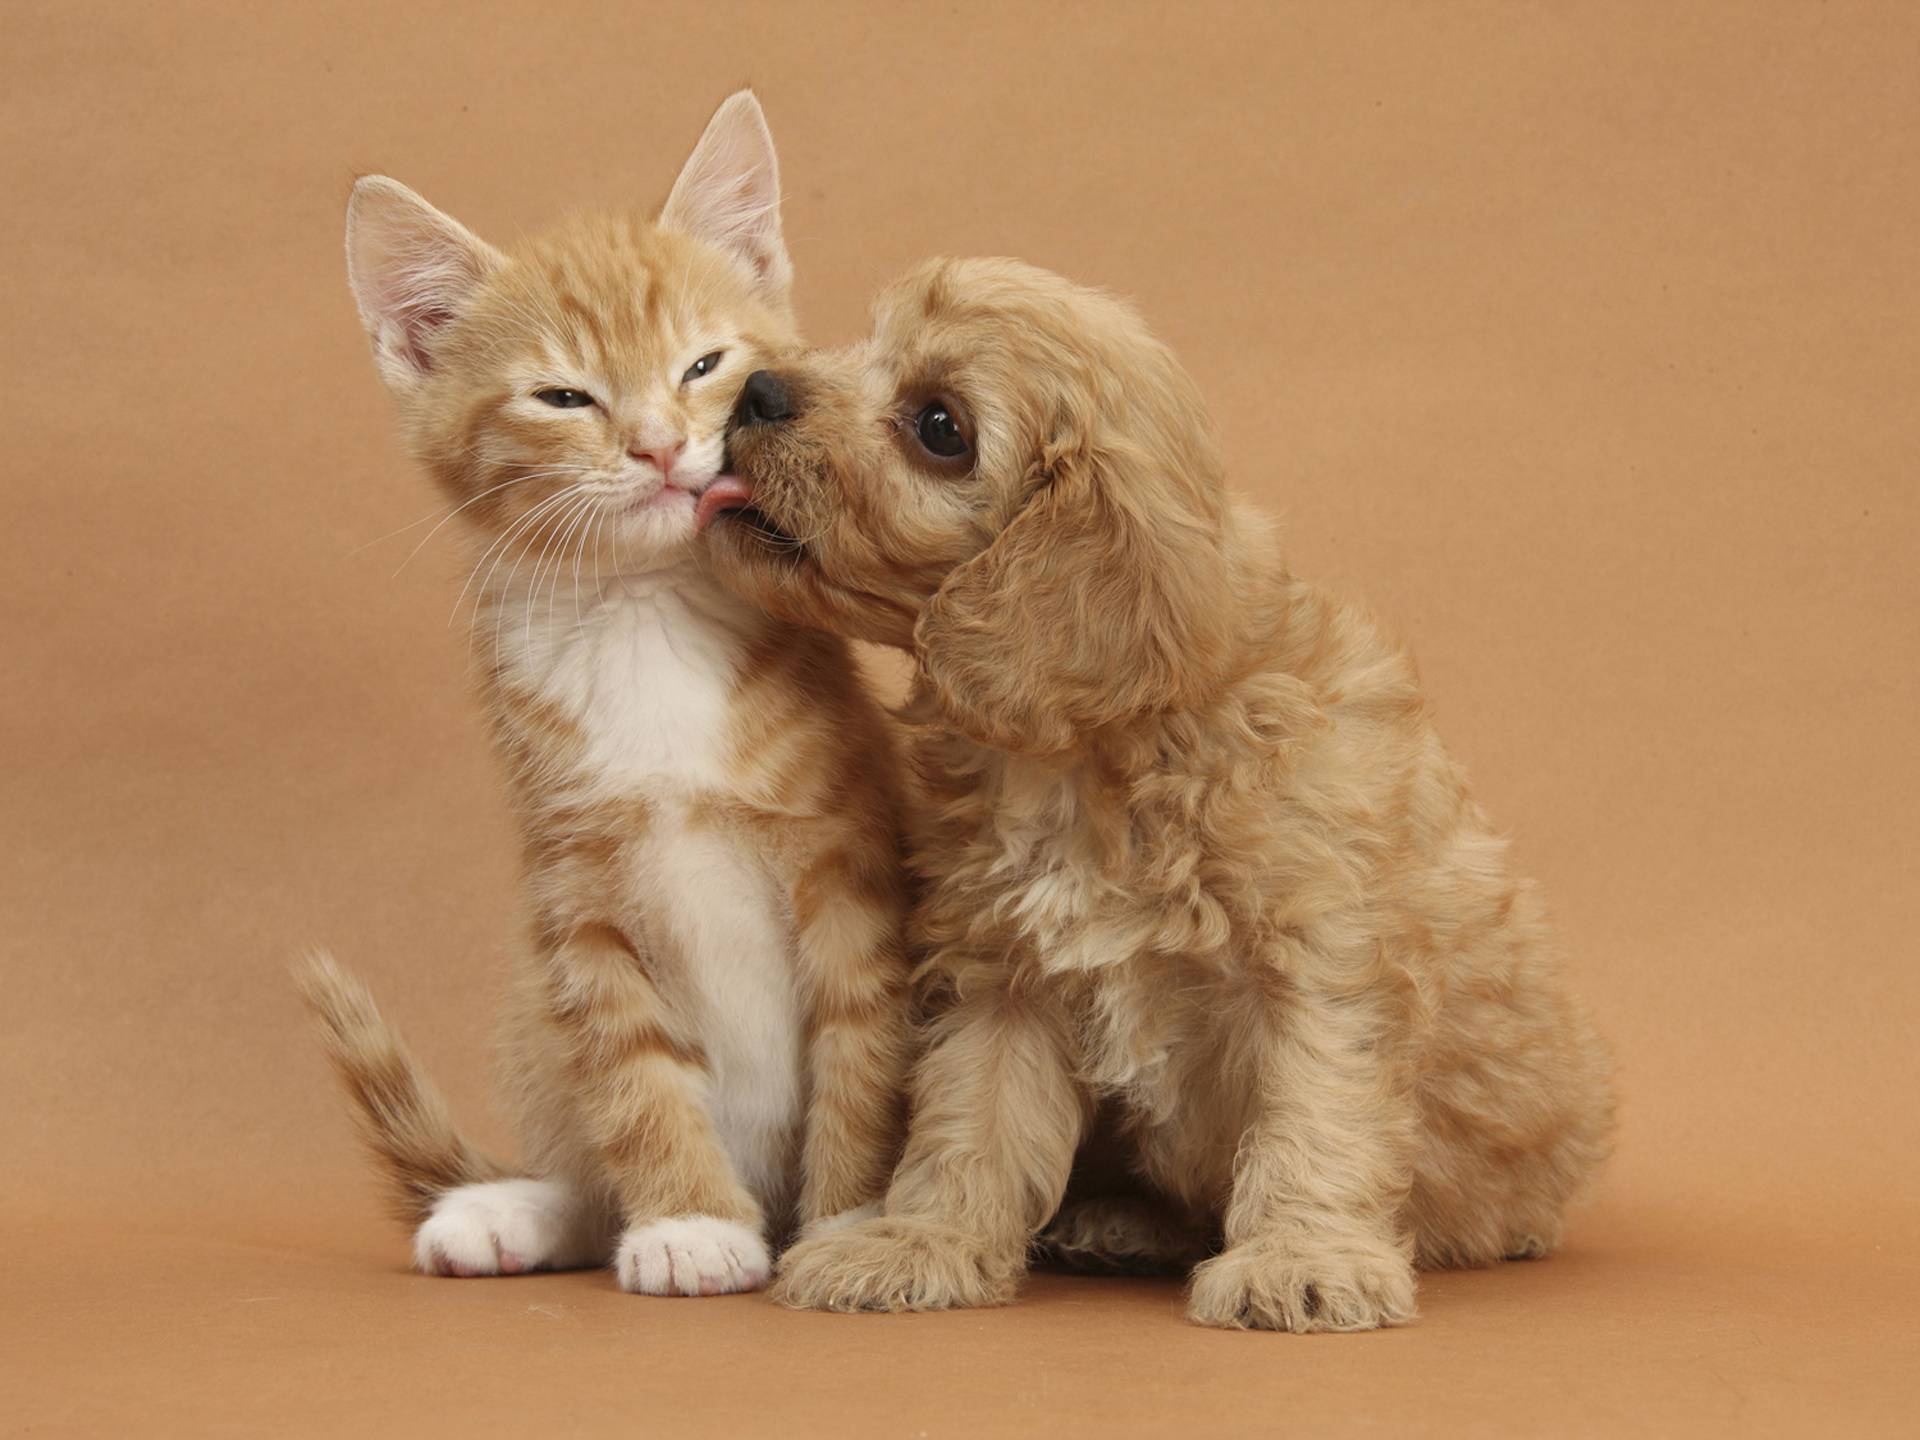 Cute dog and cat   Dogs Wallpaper